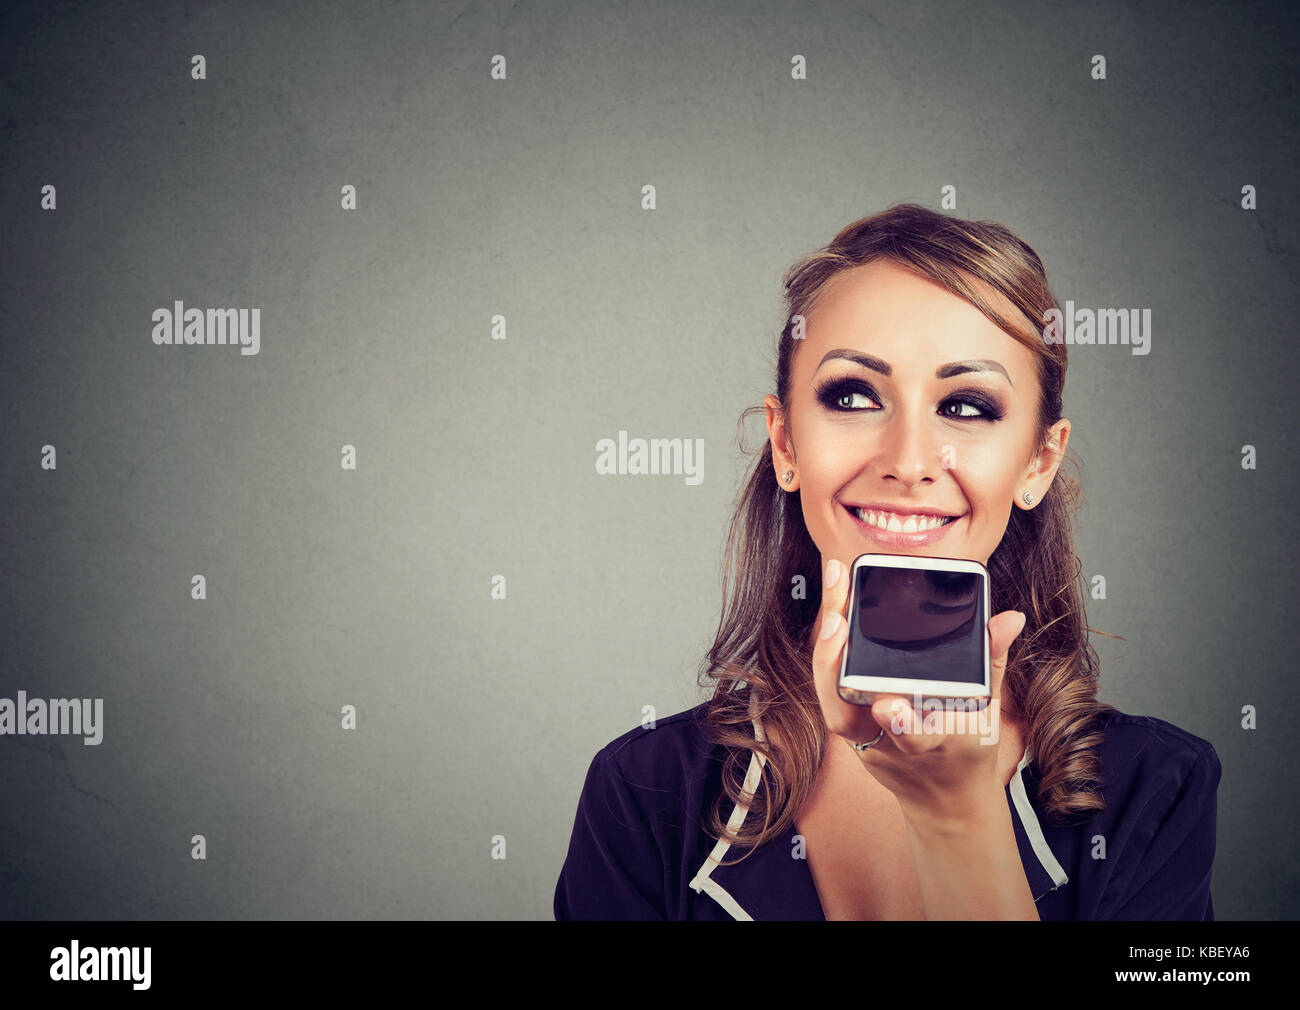 Girl using a smart phone voice recognition function online on gray wall background Stock Photo